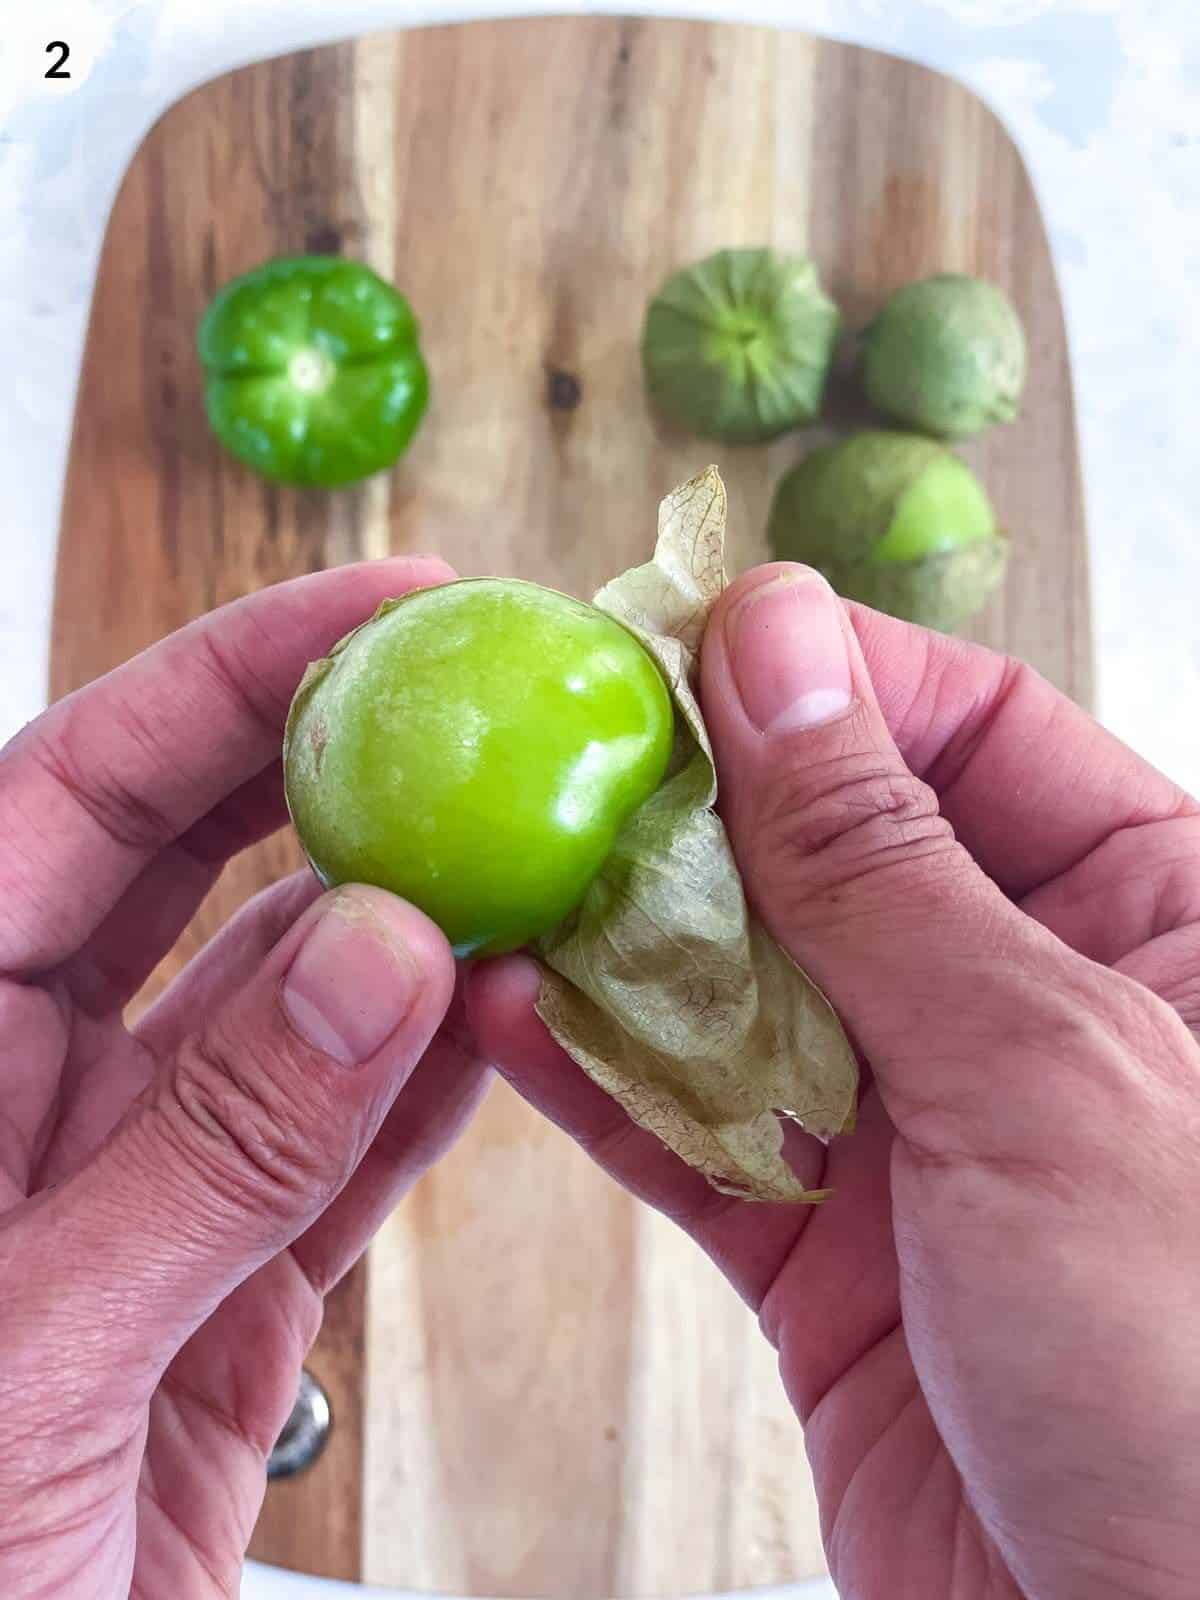 2 hands removing papery husk off a tomatillo